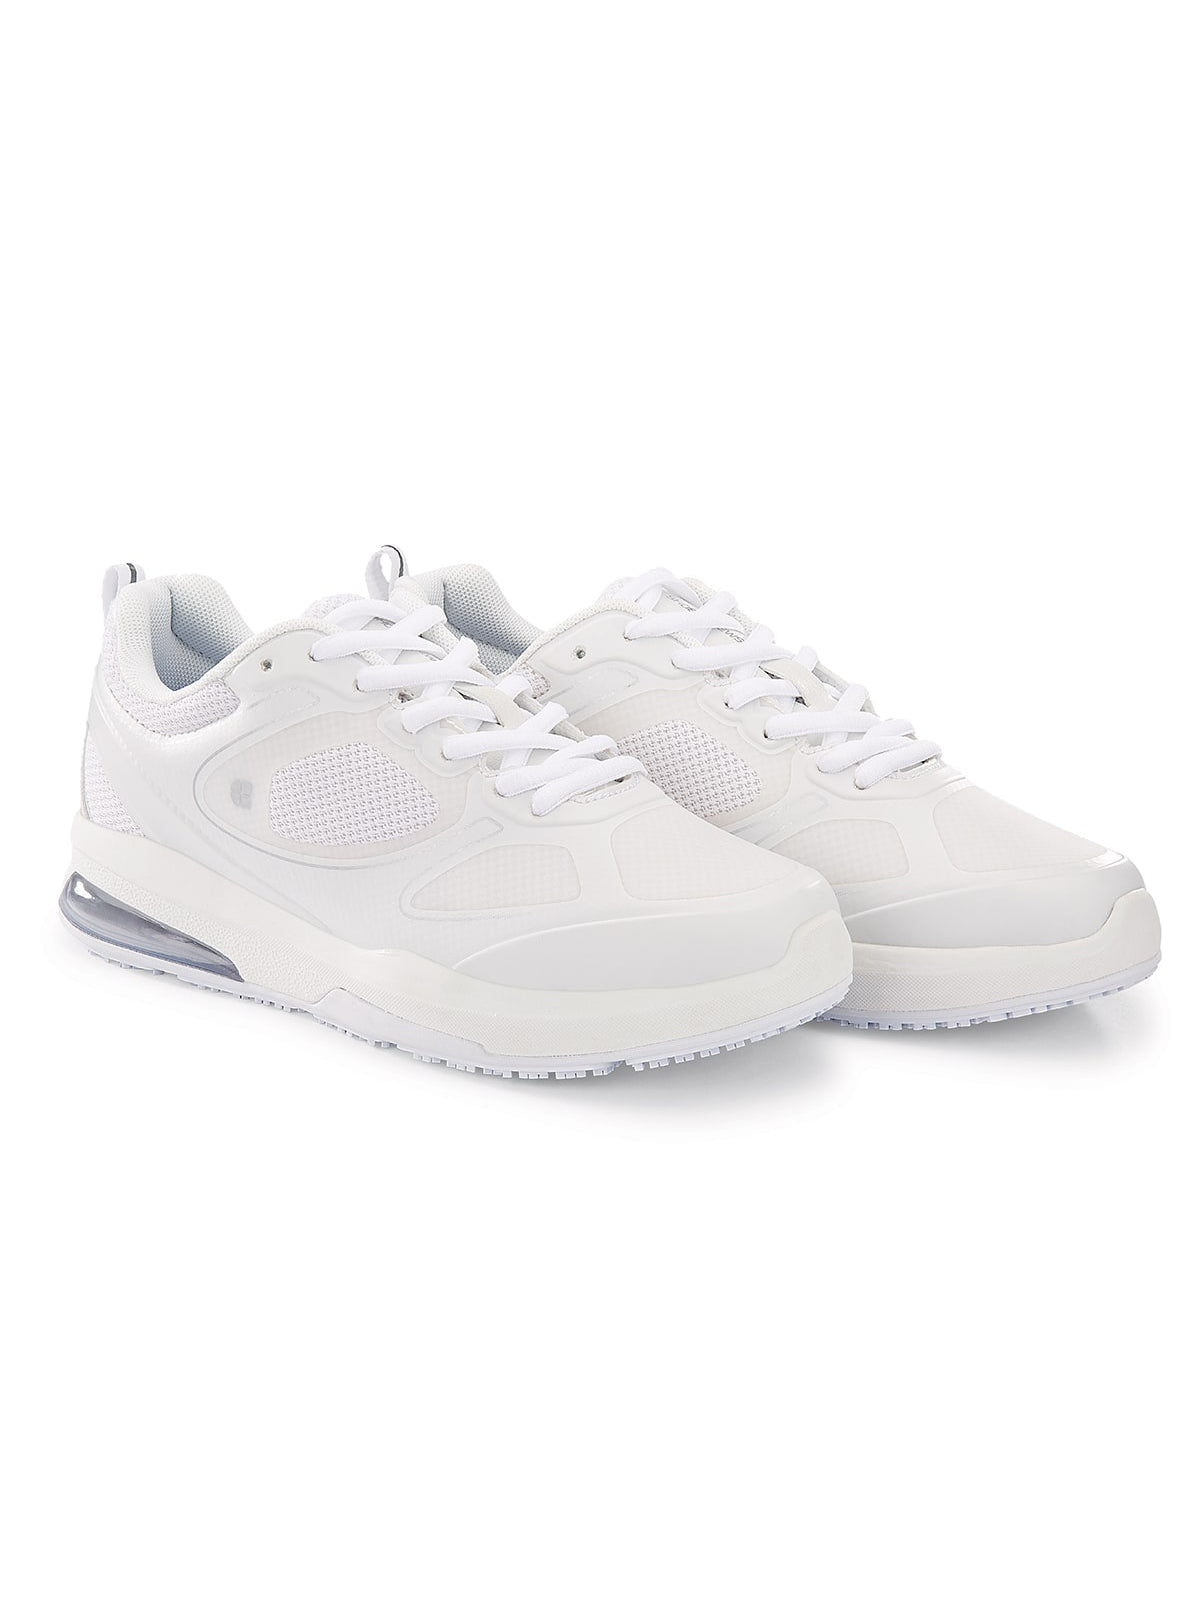 Women's Work Shoe Revolution 2 White by Shoes For Crews -  ChefsCotton